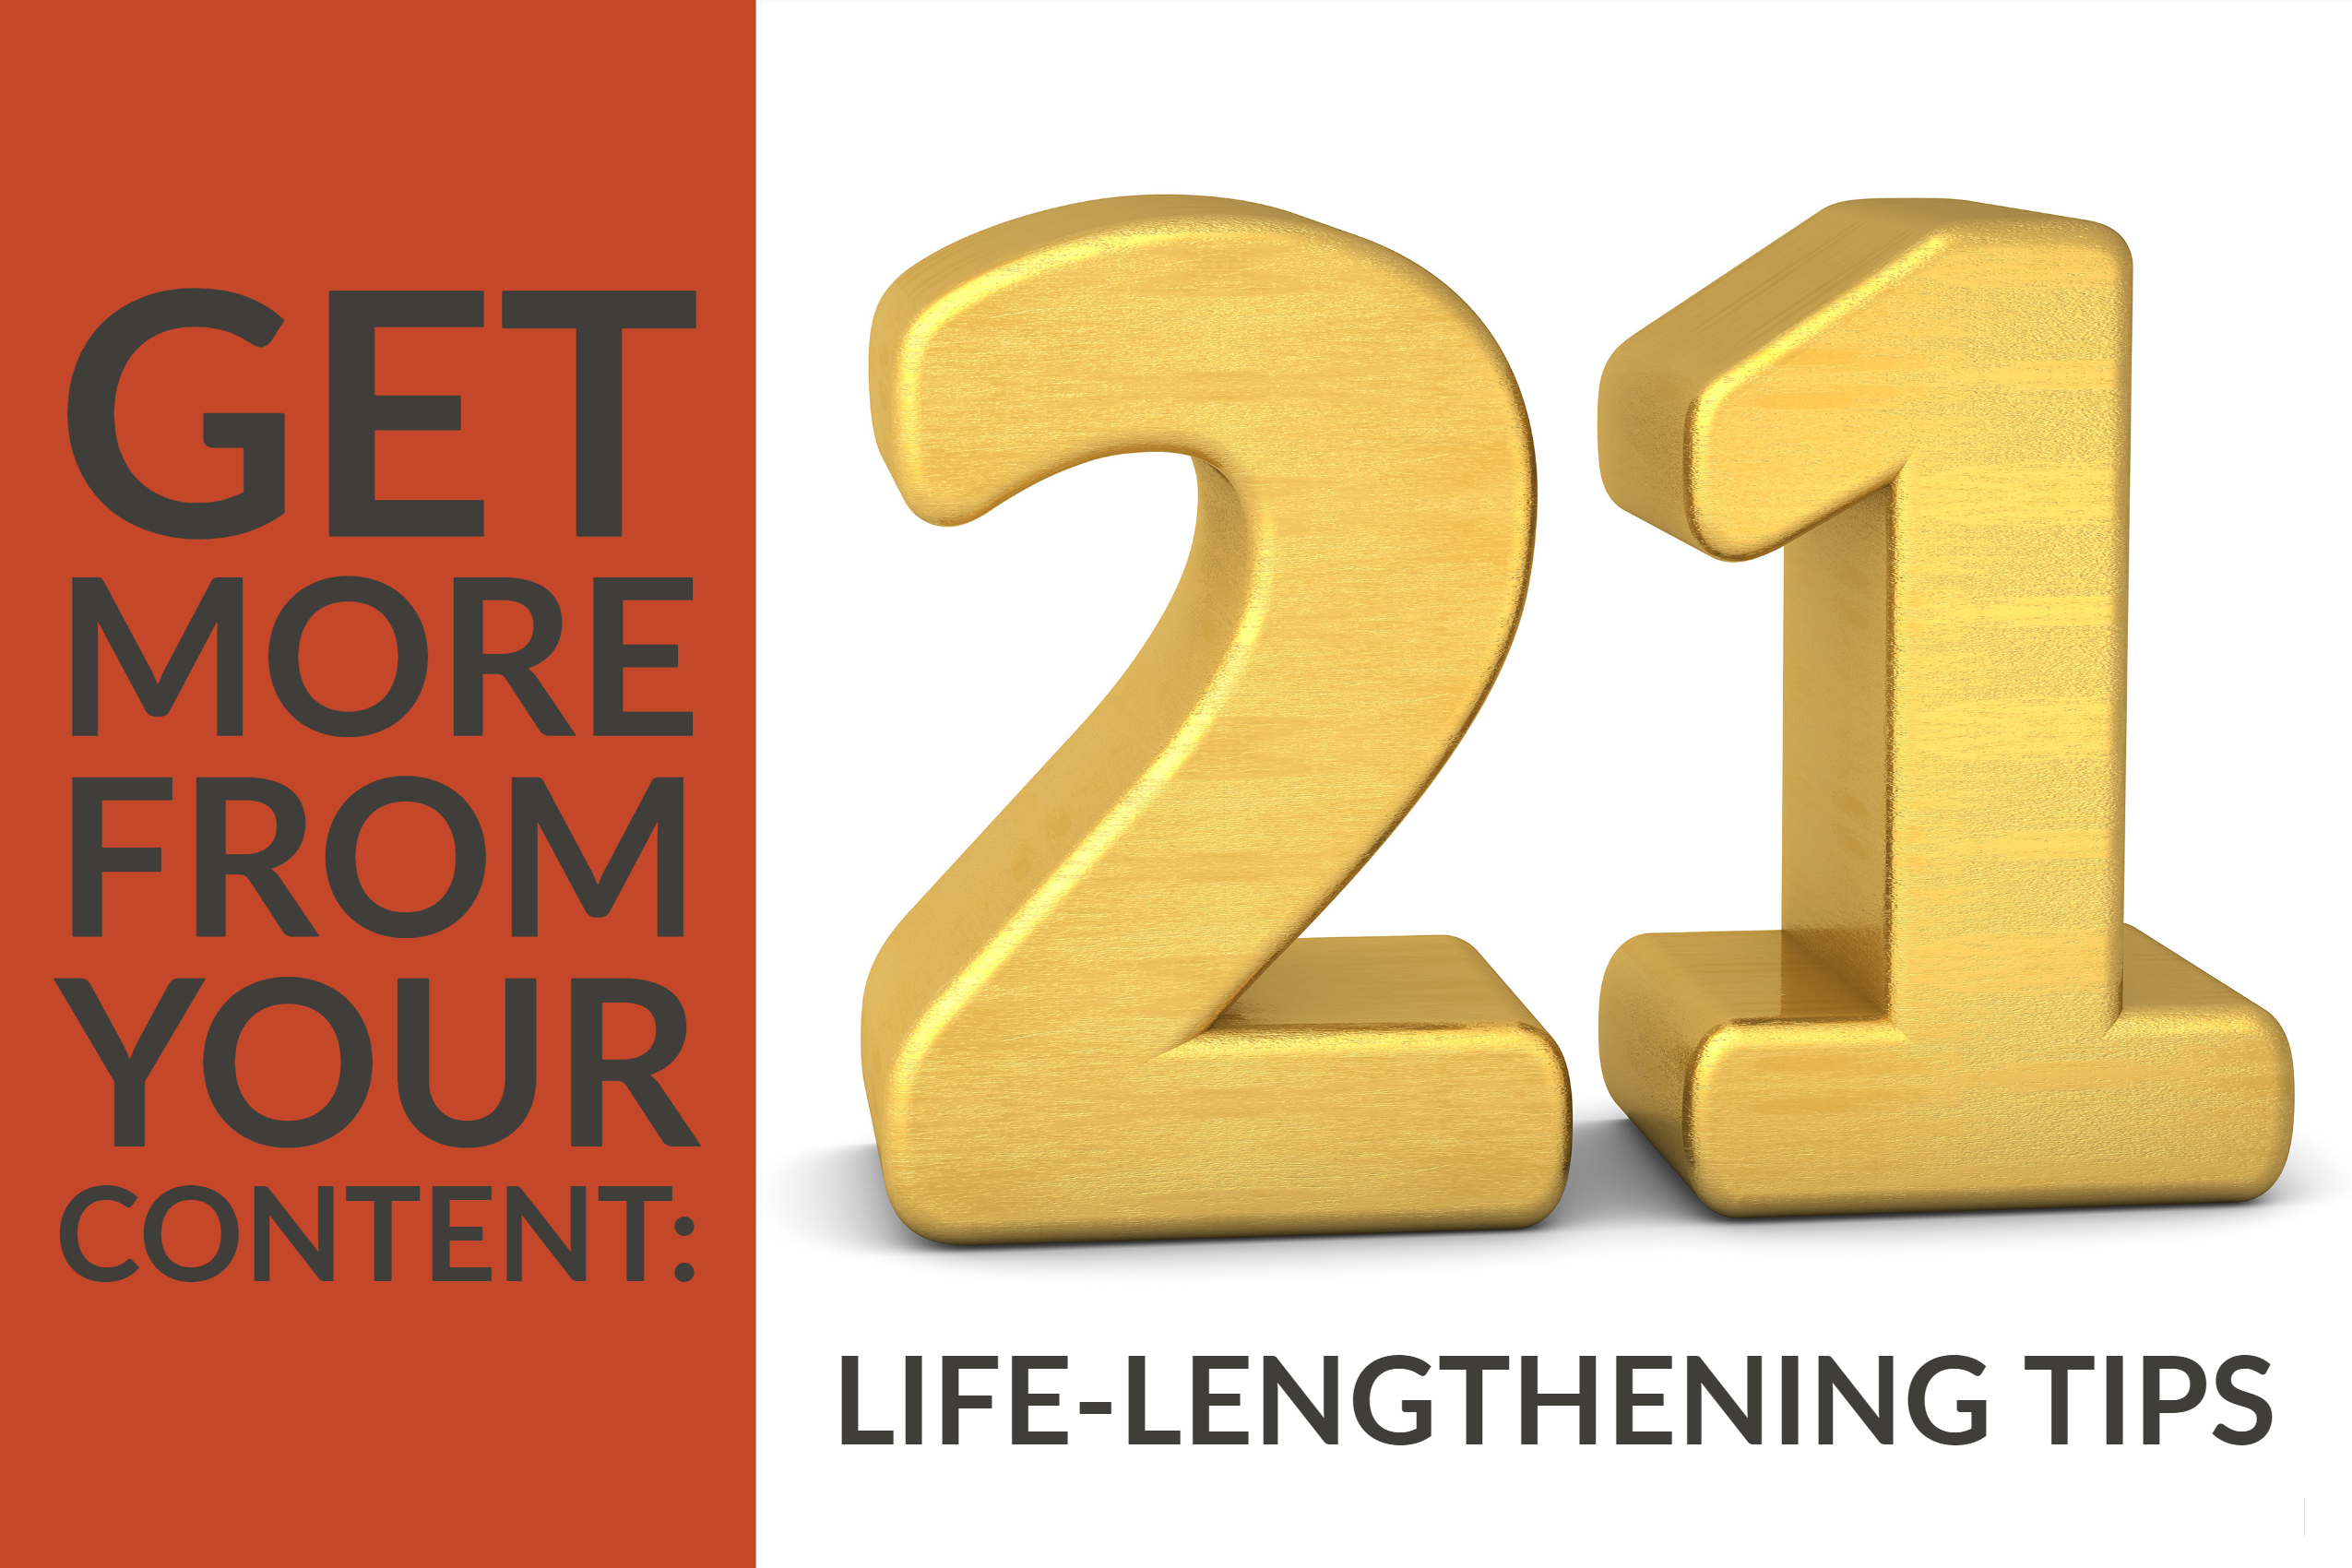 Get More From Your Content: 21 Life-Lengthening Tips